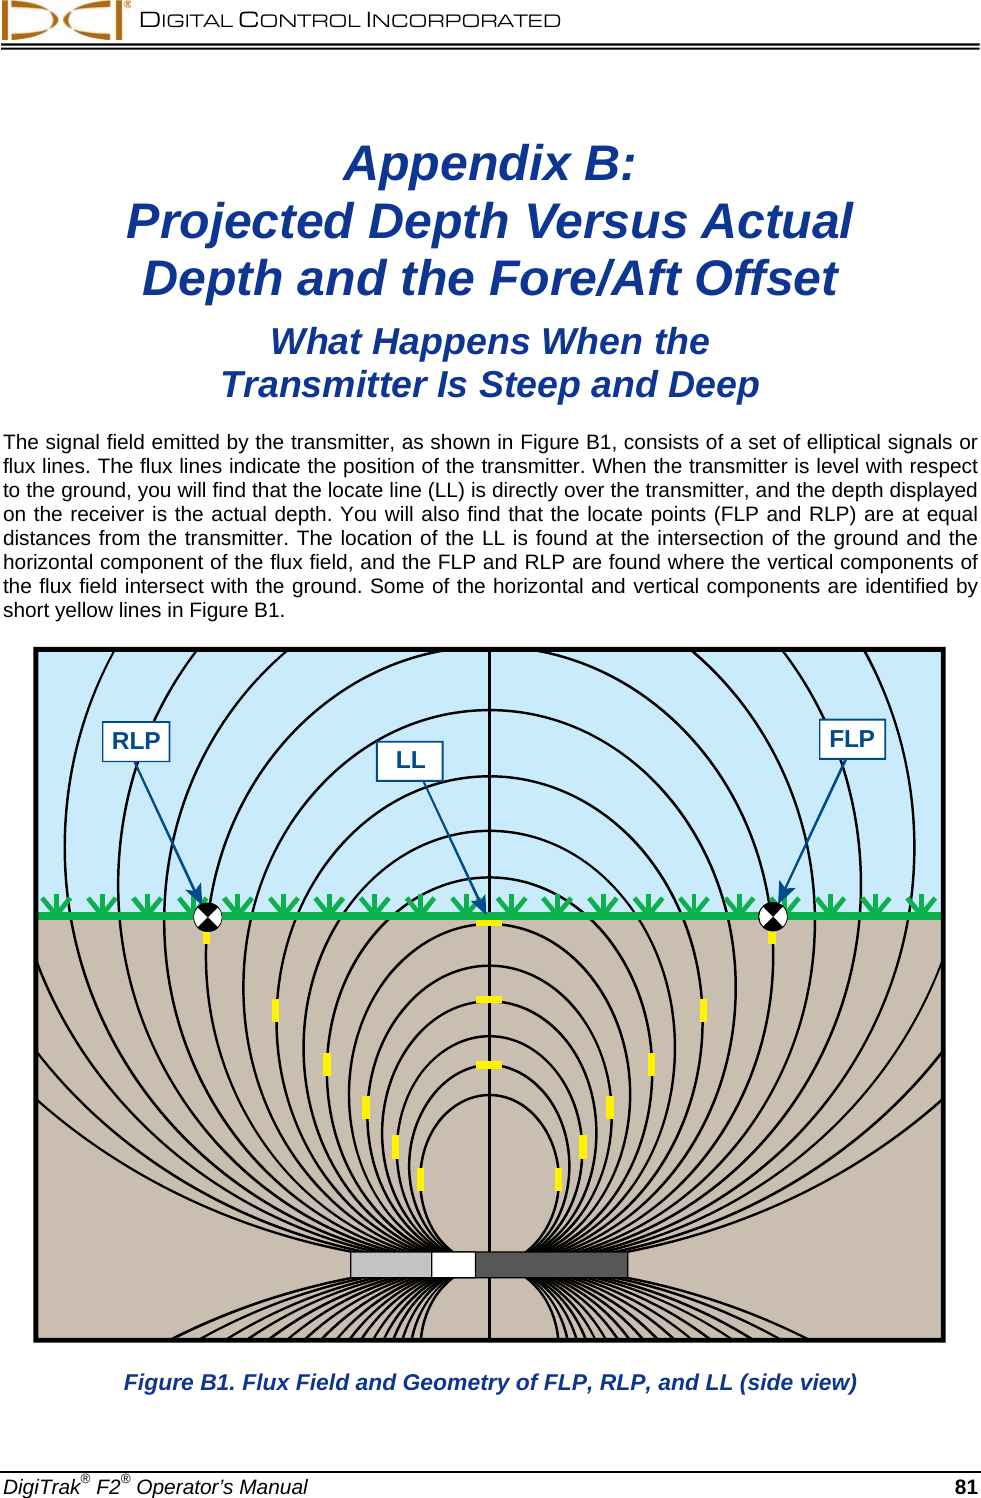  DIGITAL CONTROL INCORPORATED  DigiTrak® F2® Operator’s Manual 81 Appendix B: Projected Depth Versus Actual Depth and the Fore/Aft Offset  What Happens When the  Transmitter Is Steep and Deep The signal field emitted by the transmitter, as shown in Figure B1, consists of a set of elliptical signals or flux lines. The flux lines indicate the position of the transmitter. When the transmitter is level with respect to the ground, you will find that the locate line (LL) is directly over the transmitter, and the depth displayed on the receiver is the actual depth. You will also find that the locate points (FLP and RLP) are at equal distances from the transmitter. The location of the LL is found at the intersection of the ground and the horizontal component of the flux field, and the FLP and RLP are found where the vertical components of the flux field intersect with the ground. Some of the horizontal and vertical components are identified by short yellow lines in Figure B1. RLP FLPLL Figure B1. Flux Field and Geometry of FLP, RLP, and LL (side view) 